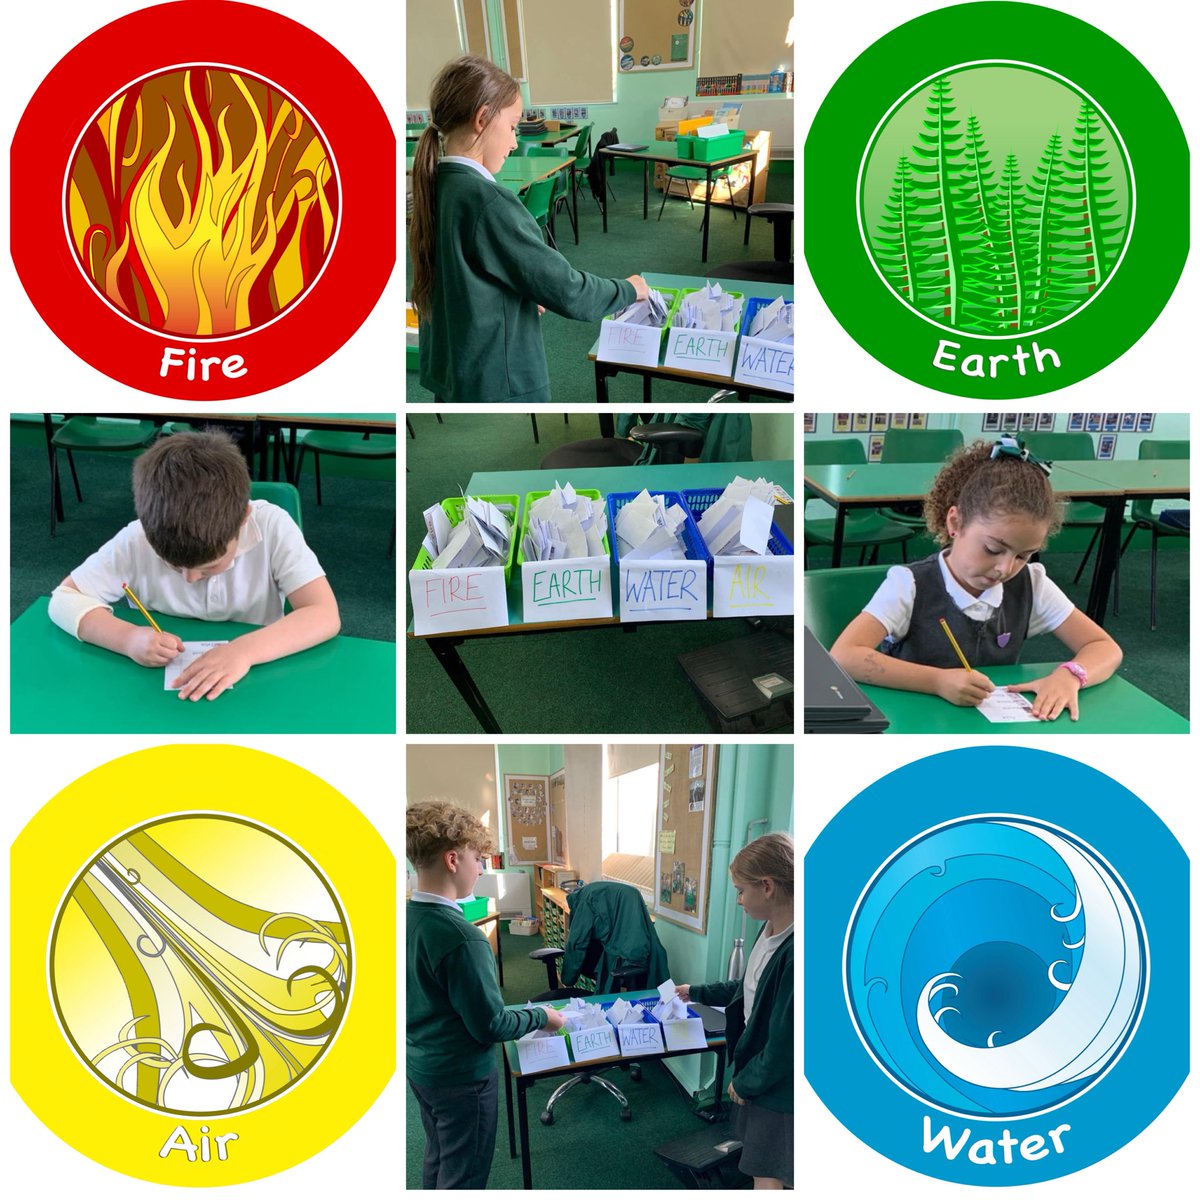 This week we have been voting for the new House Captains. Our candidates recorded speeches and the children placed their votes. Results to be revealed… #democracy #britishvalues #pupilvoice #personaldevelopment